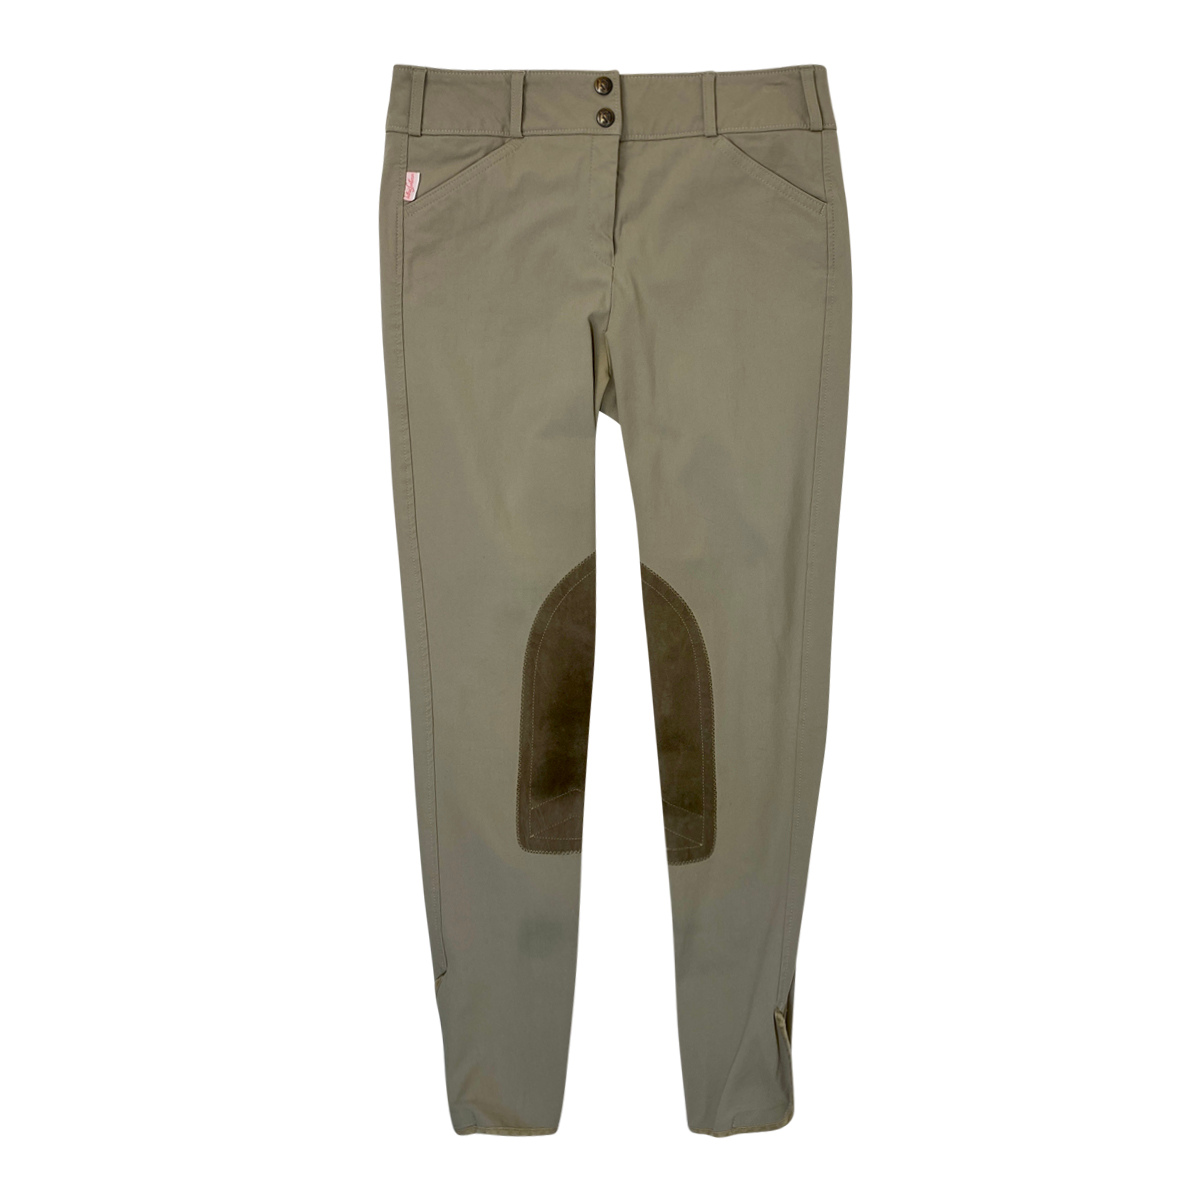 A pair of olive green show breeches on a white background.